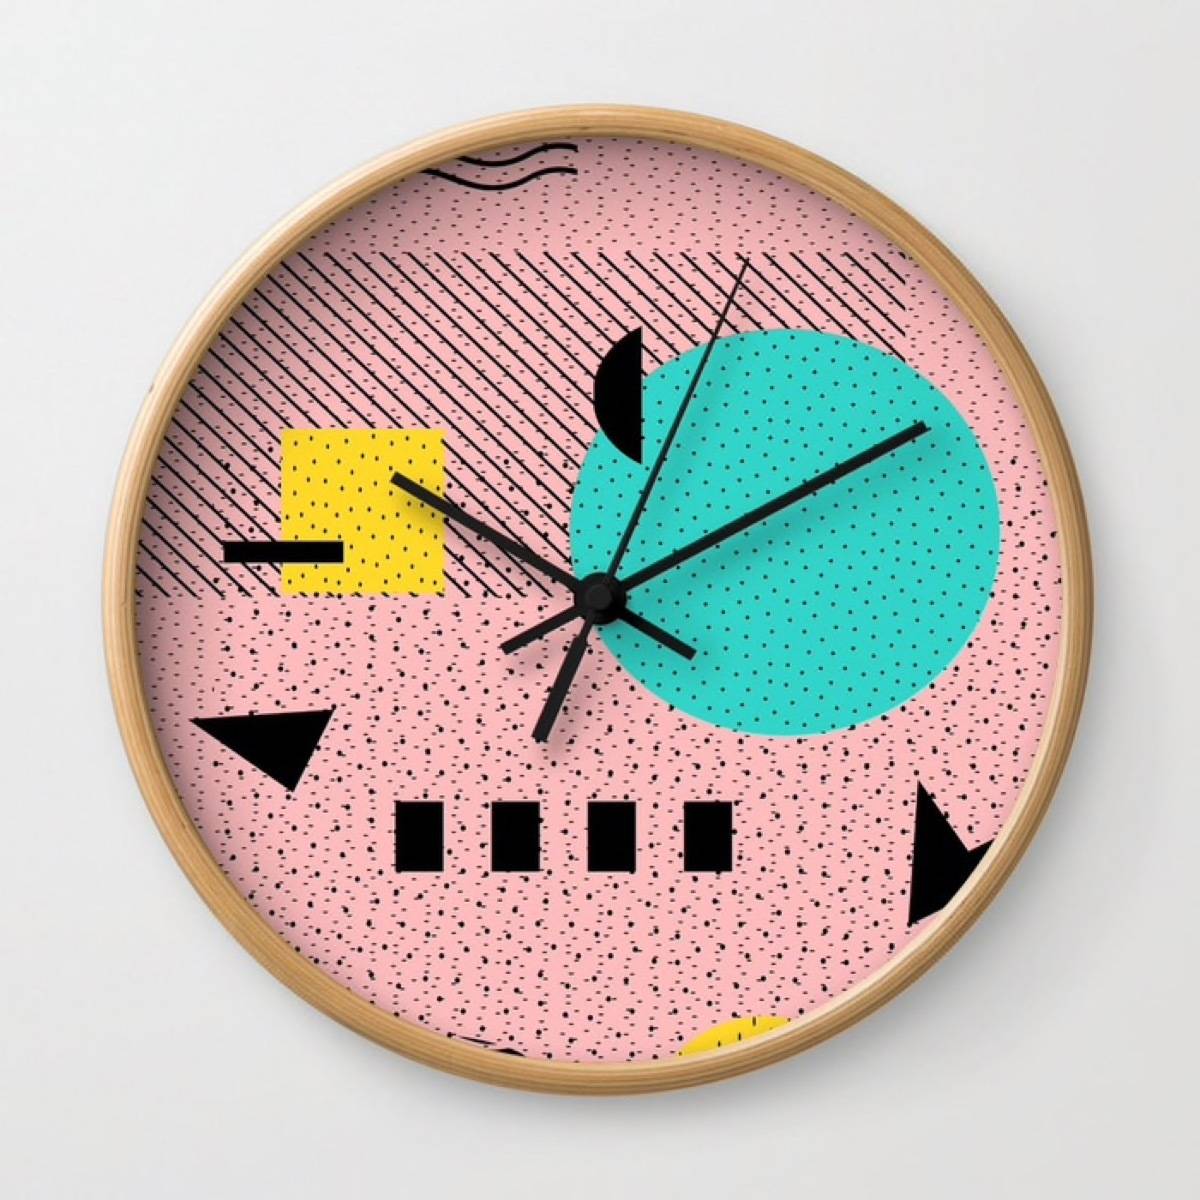 80s-inspired design on clock by Silver Pegasus, via Society 6